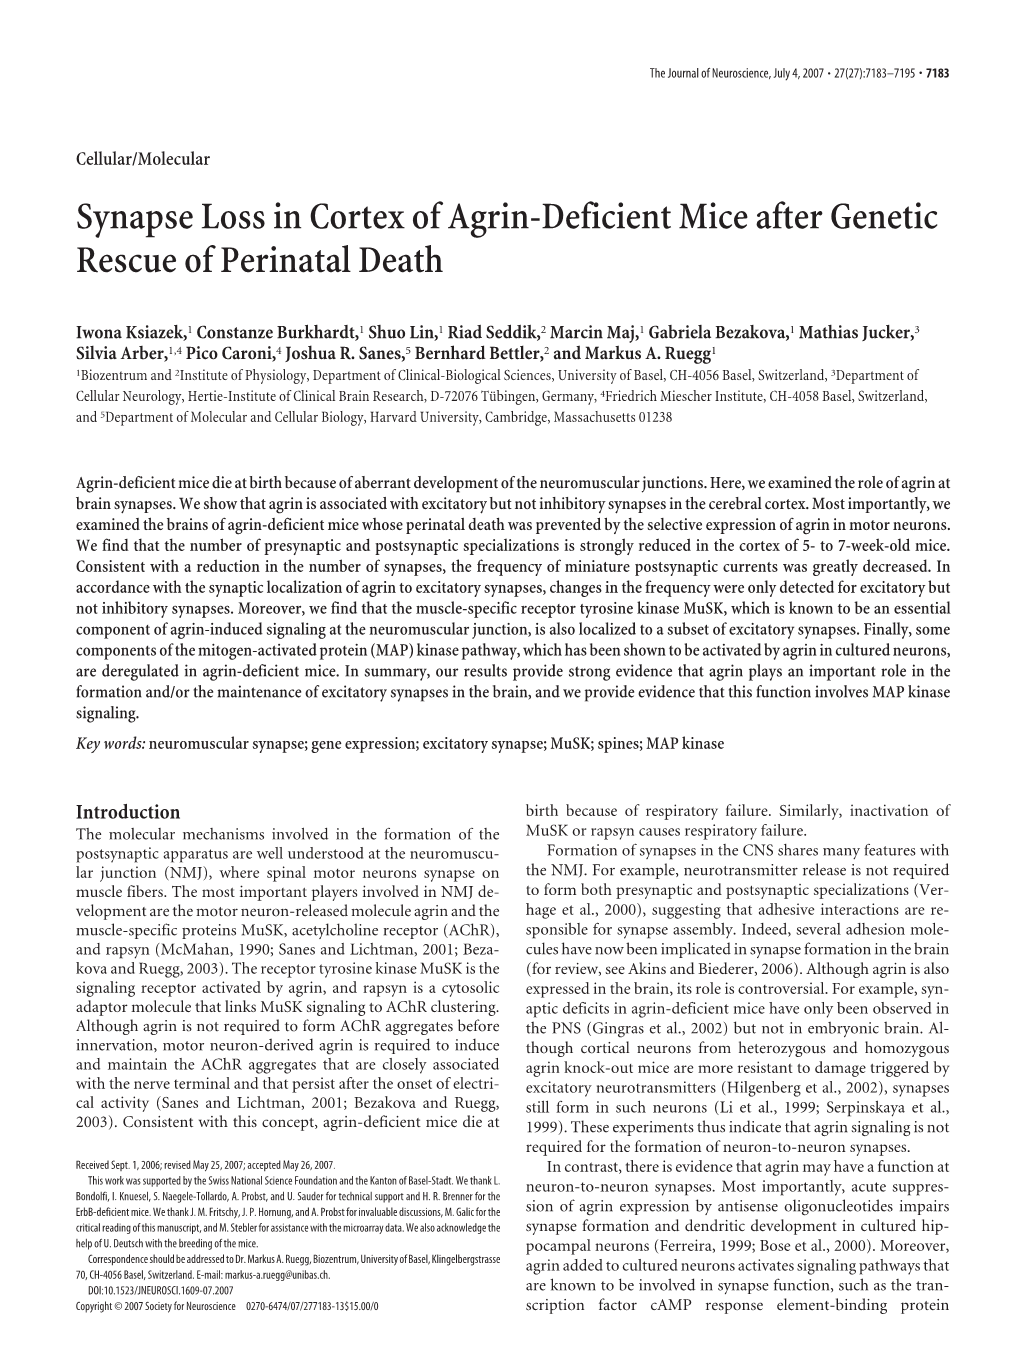 Synapse Loss in Cortex of Agrin-Deficient Mice After Genetic Rescue of Perinatal Death